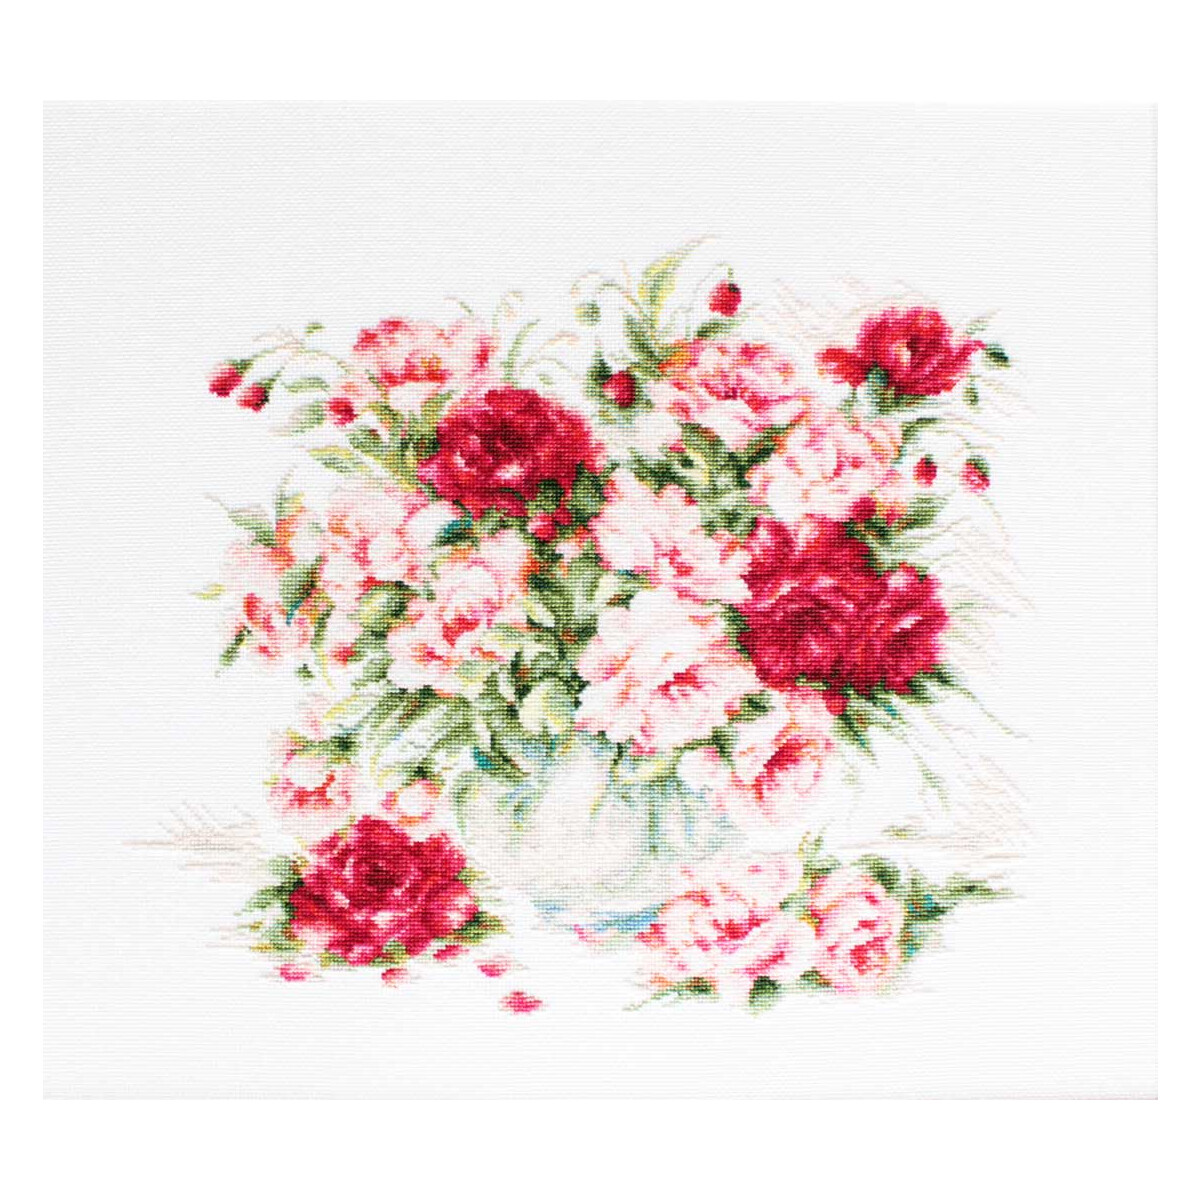 Luca-S counted Cross Stitch kit "Peonies",...